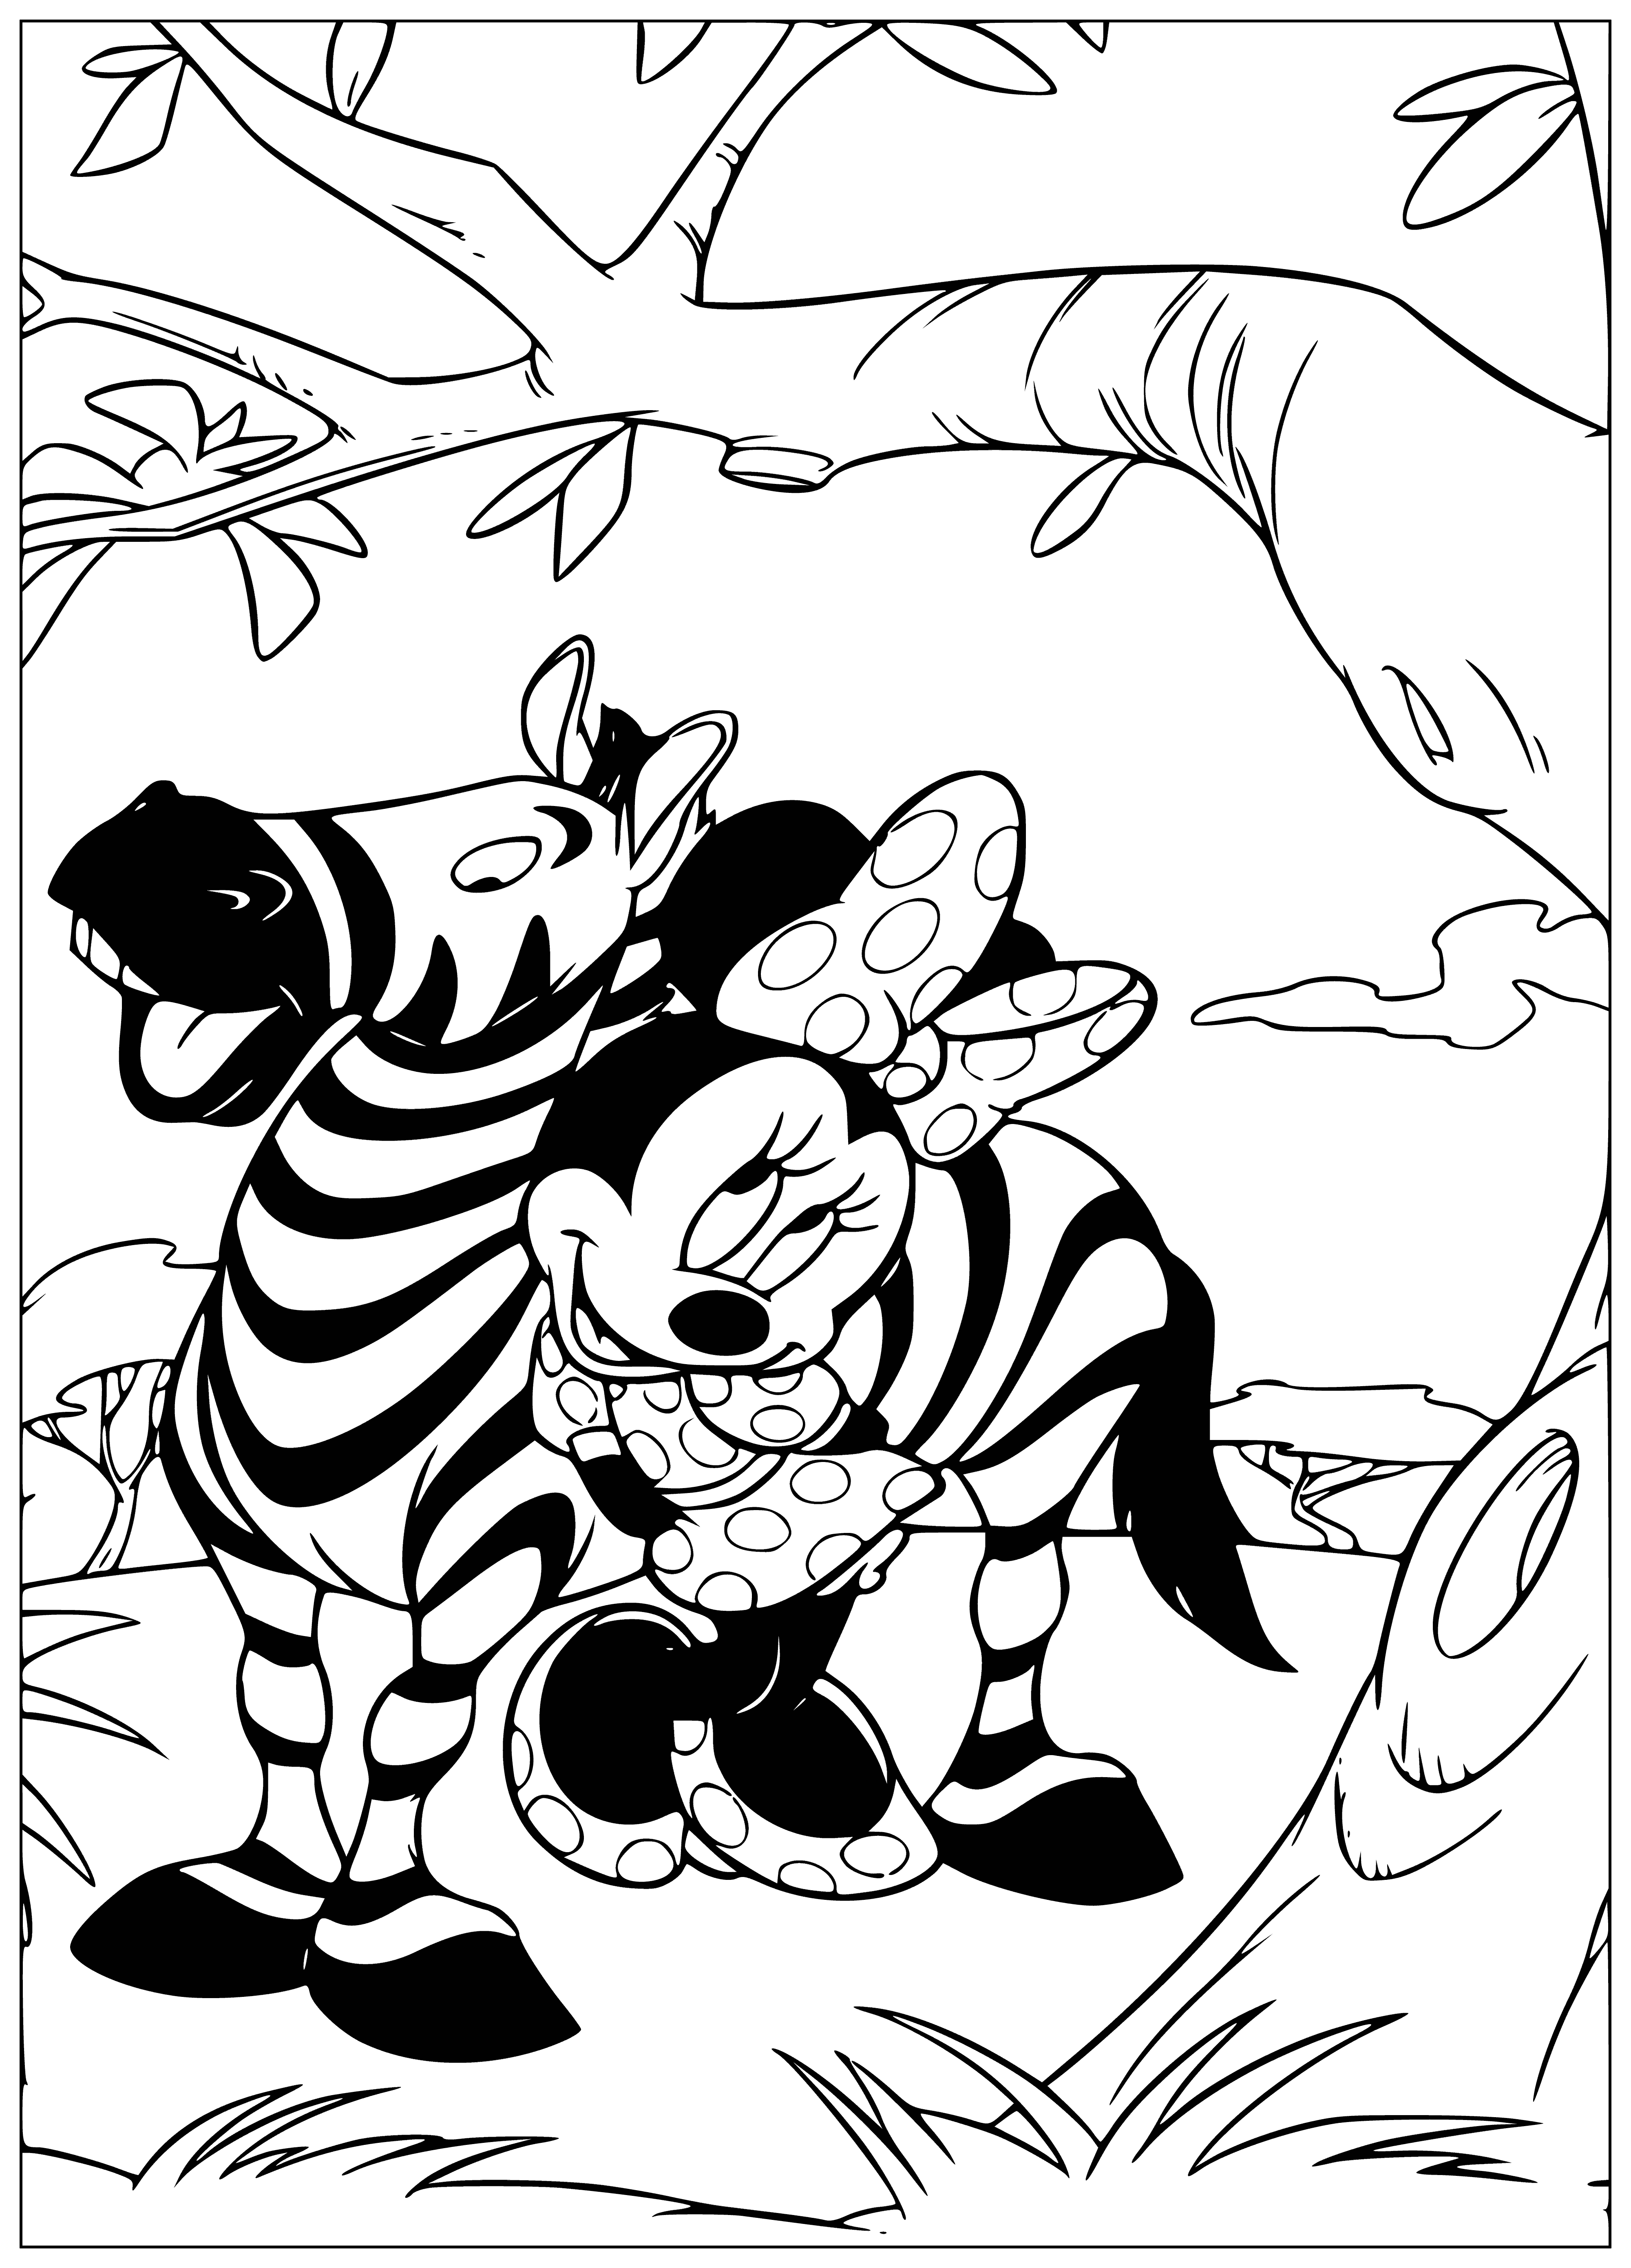 coloring page: The Mickey Mouse & Co coloring page features a cartoon mouse atop a happy zebra holding an ear.